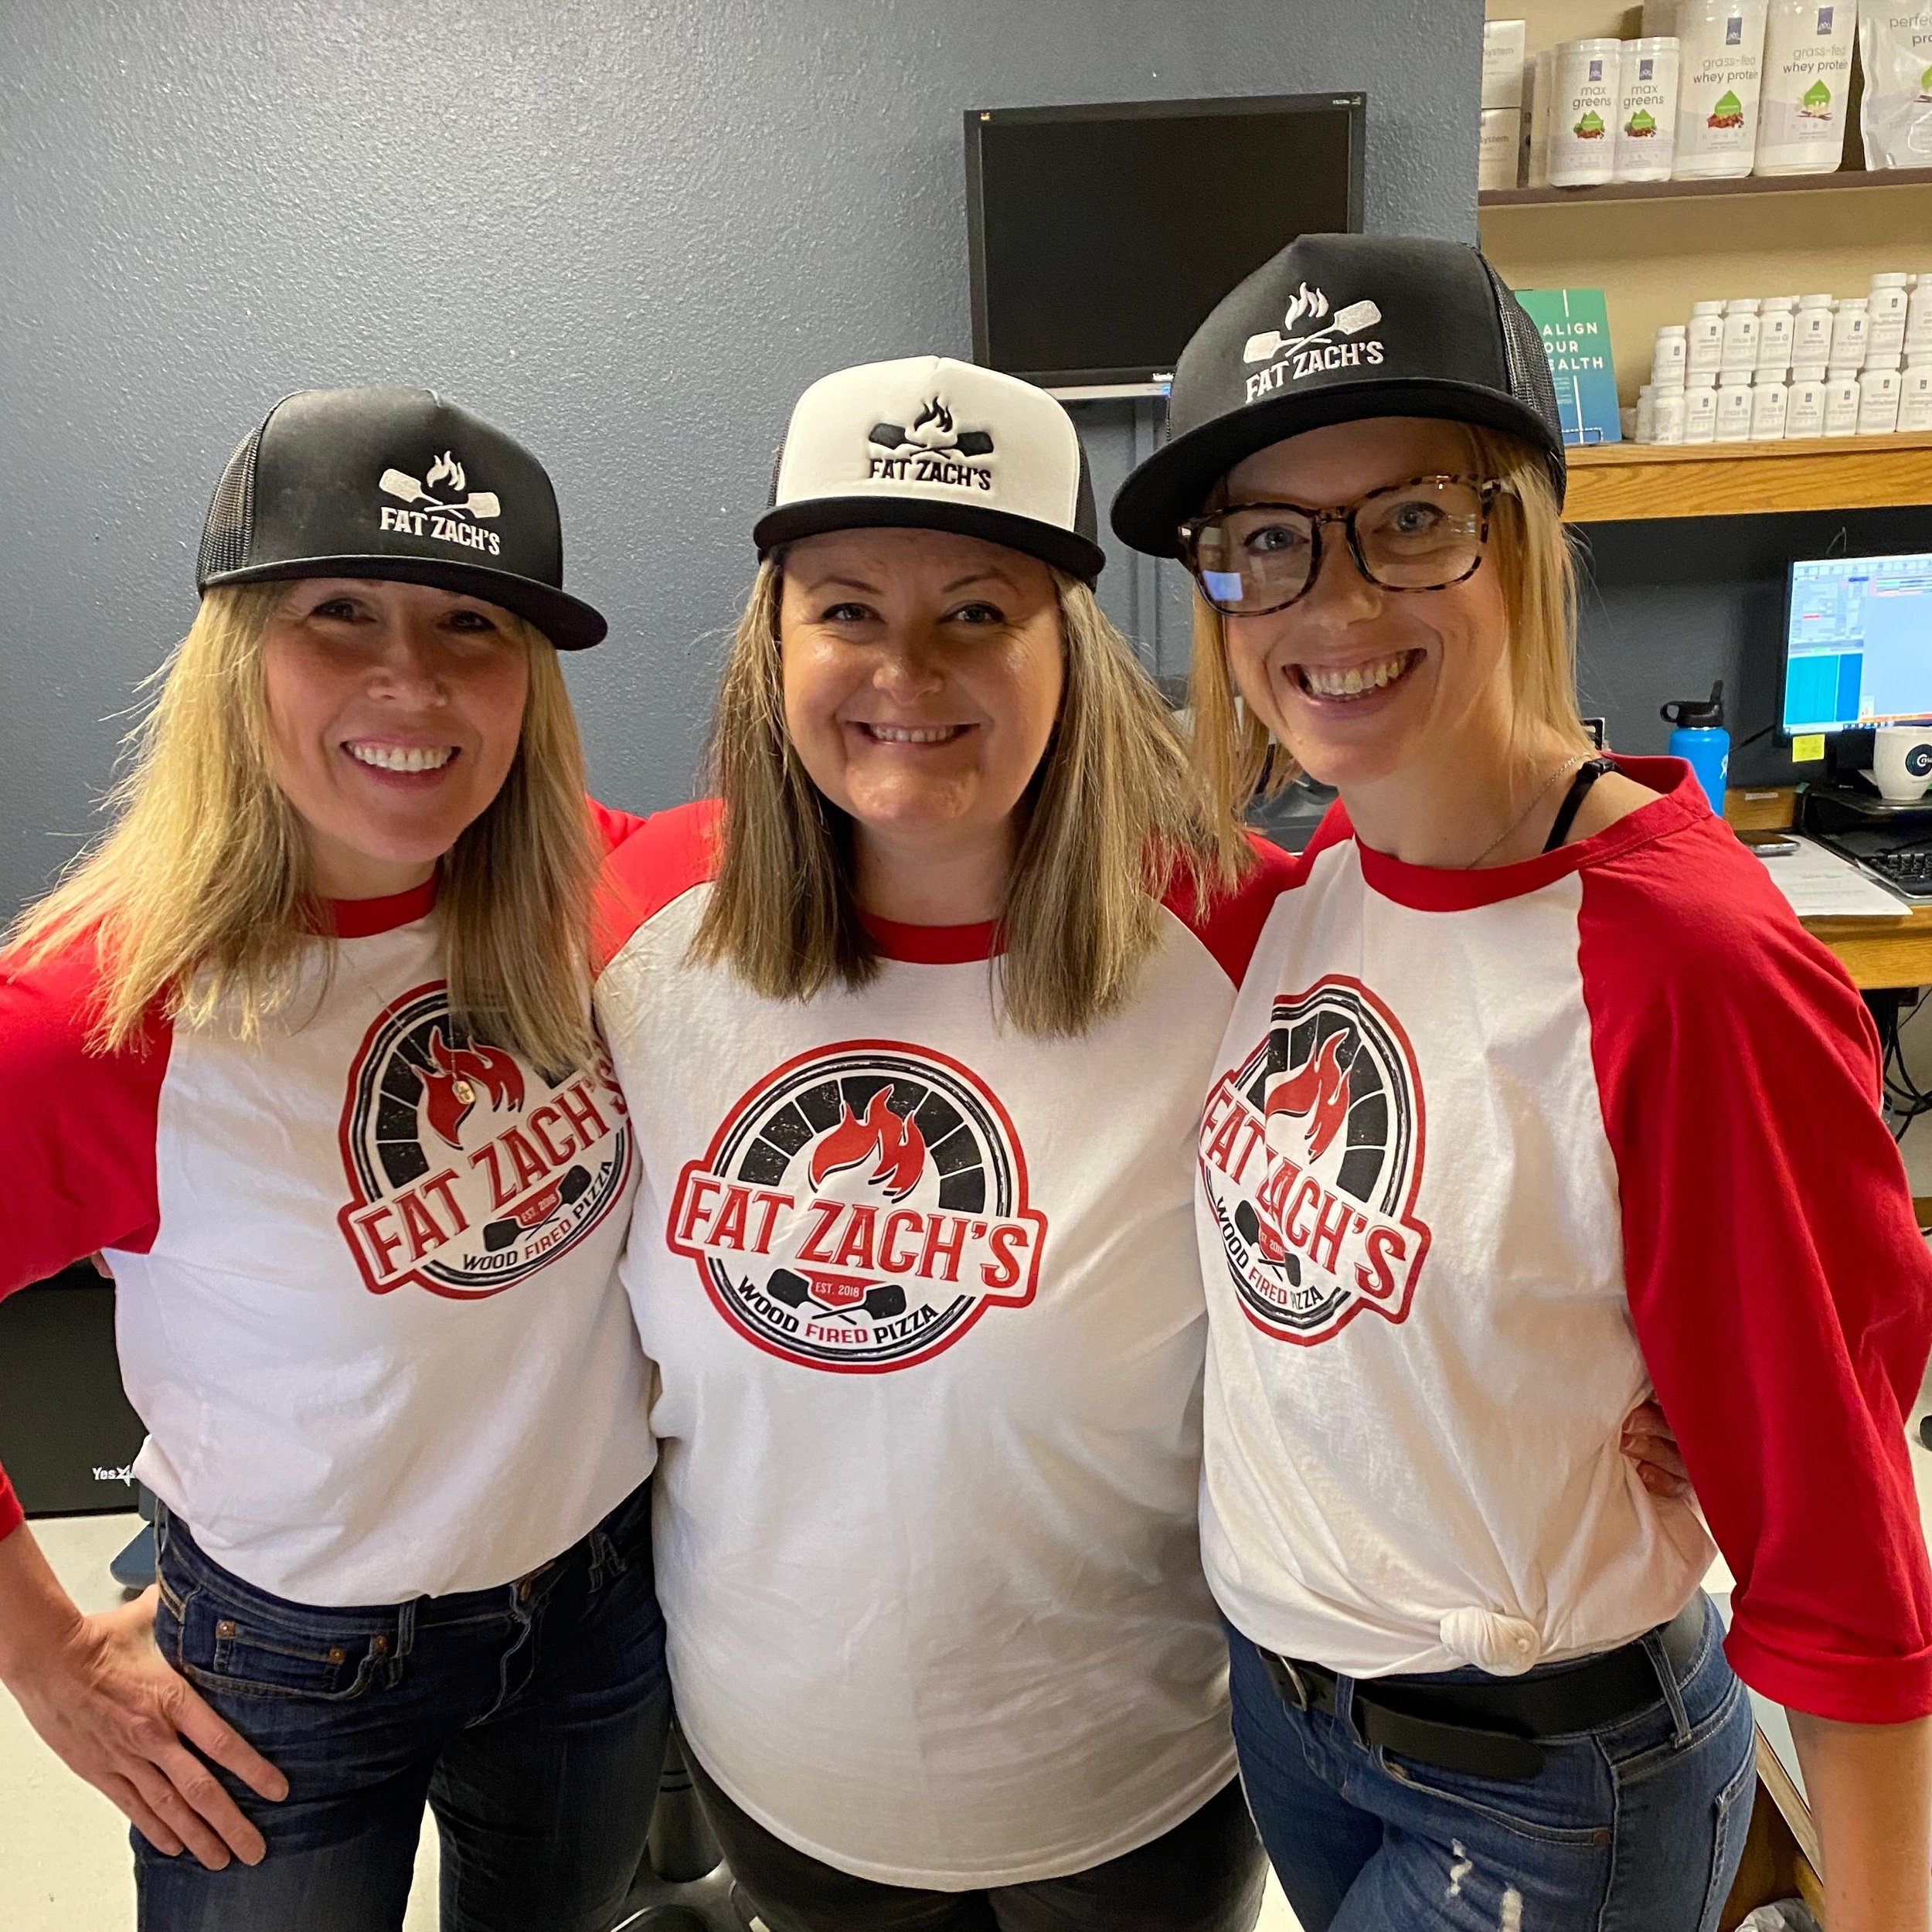 #stylin &amp; #smilin (because our merch is a wearable coupon!) 💸🤑Get 10% off your order when you wear your #FZGear to your in-store visit! 
fatzachspizza.com
.
.
.
.
#eatlocal #smallbusiness #downtown #smallbusiness #puyallup #pnw #pizza #yummy #i